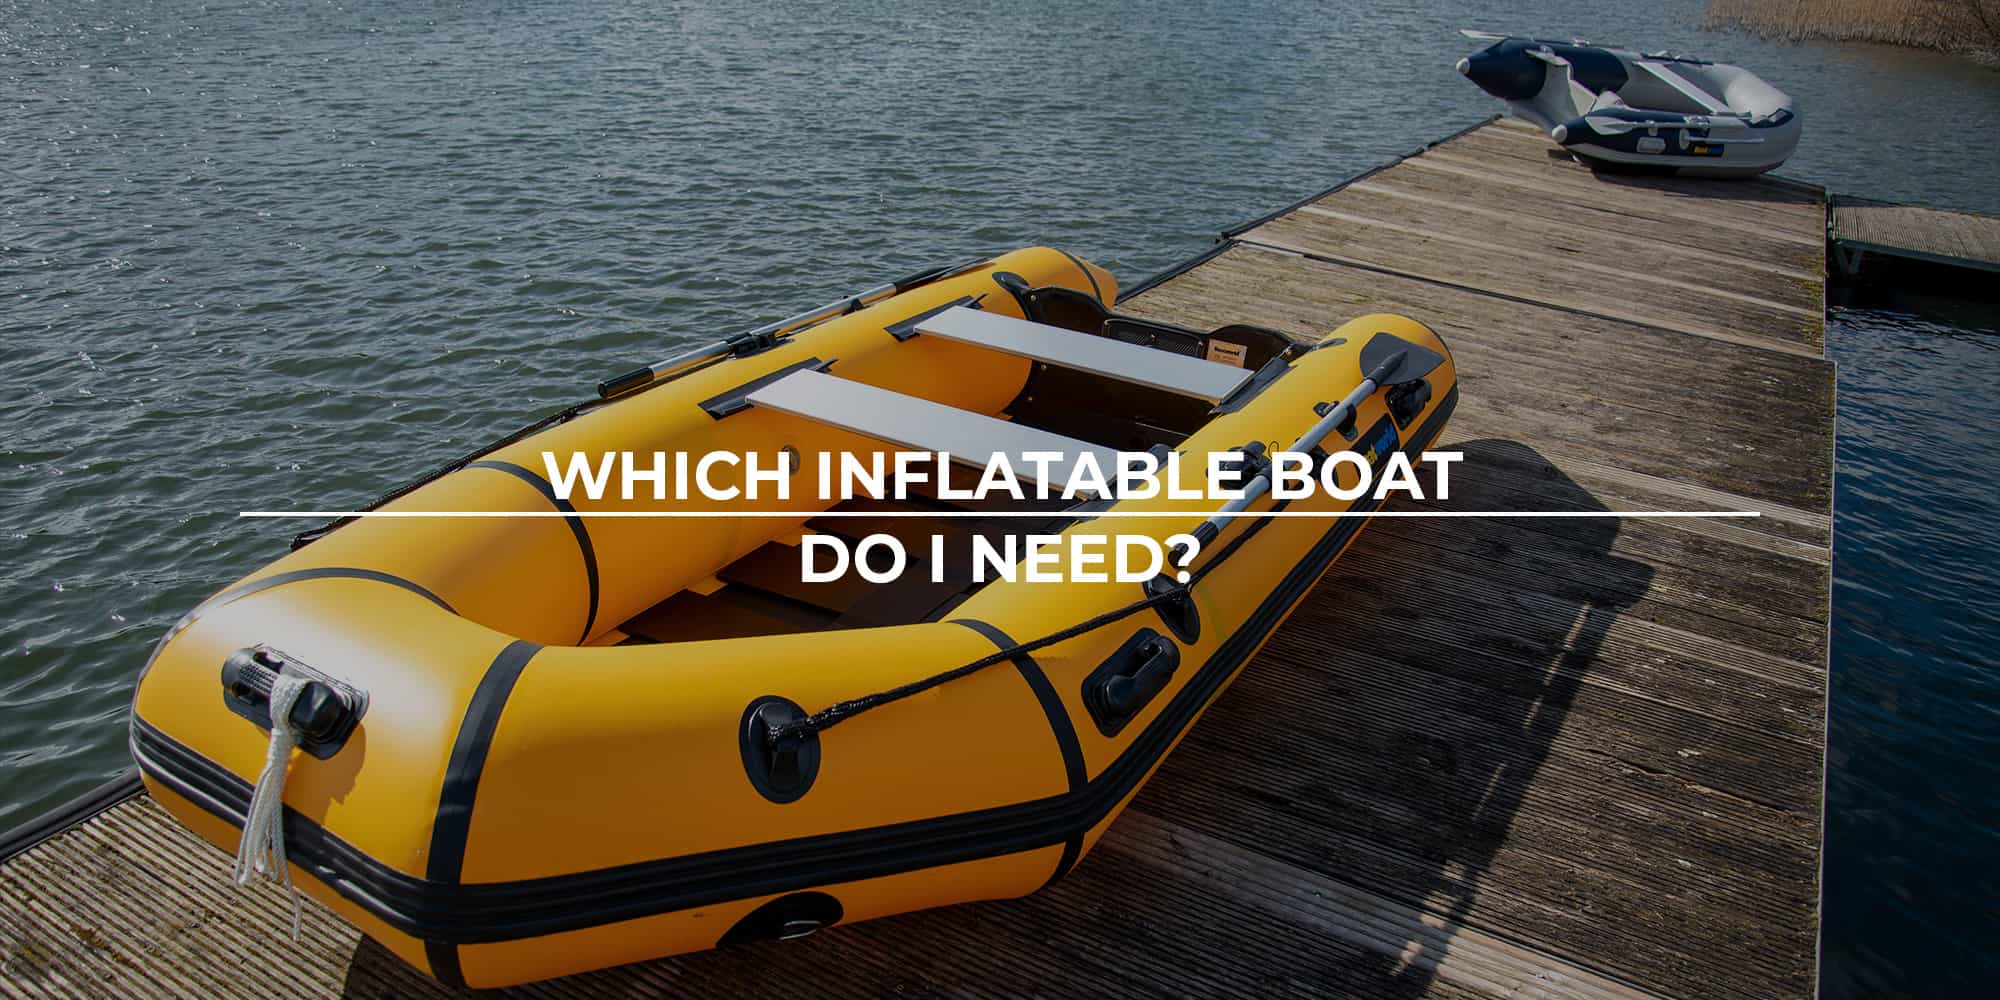 https://boatworld.co.uk/wp-content/uploads/2021/03/Which-Inflatable-Boat-Do-I-Need-Blog-Banner.jpg